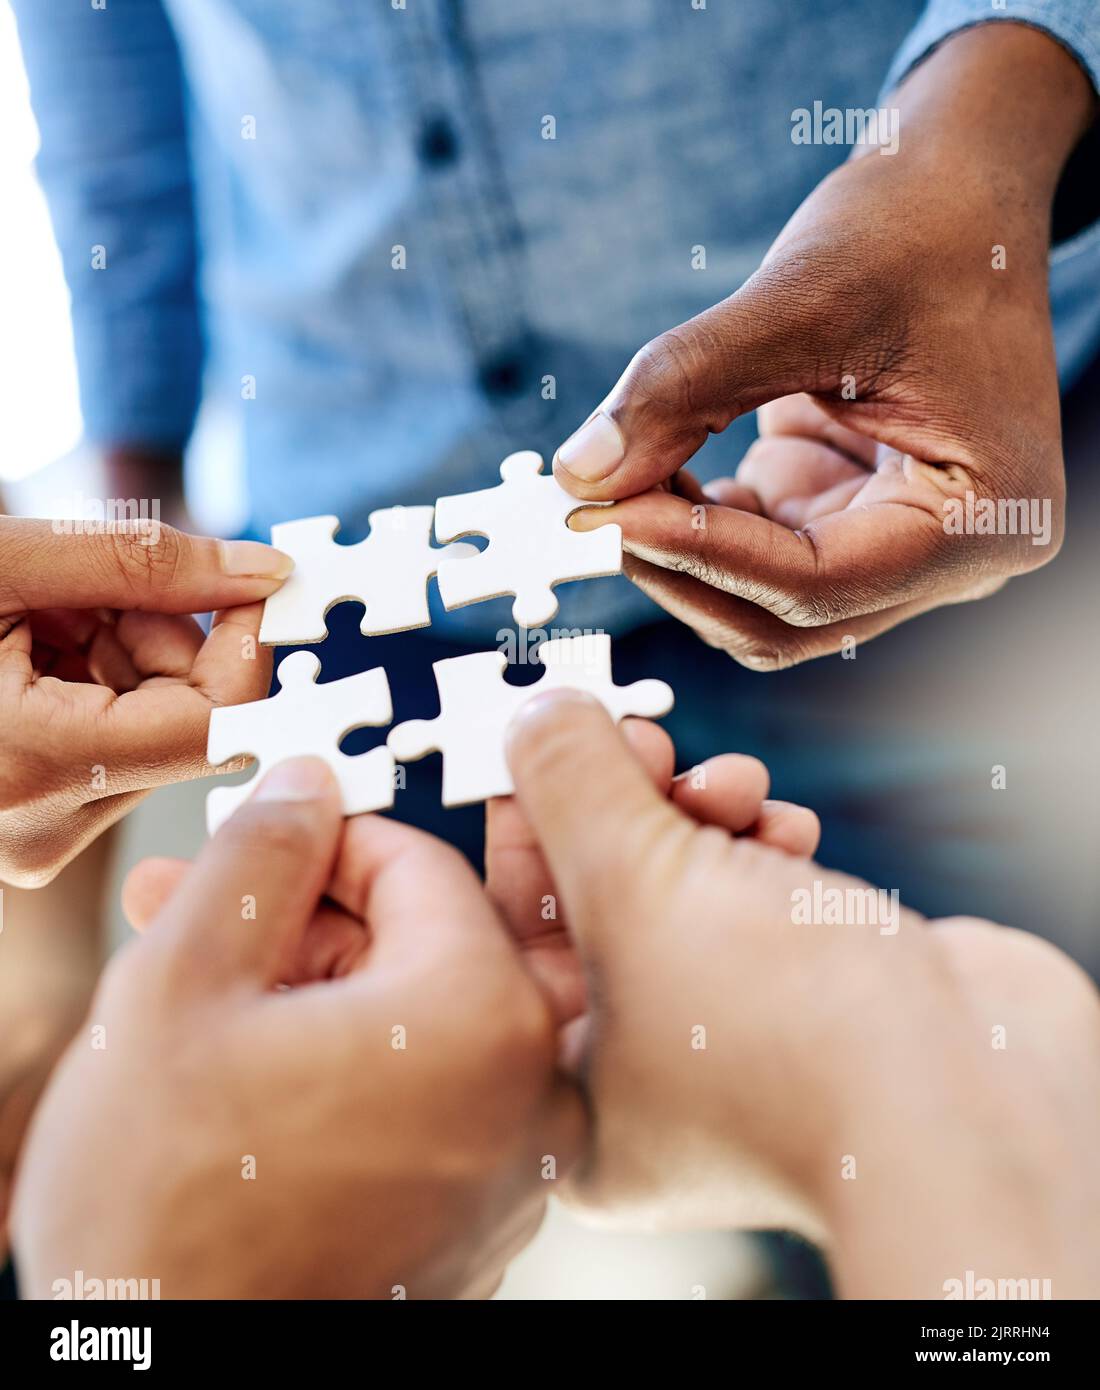 Pulling together to solve a problem. a work group connecting pieces of a puzzle. Stock Photo